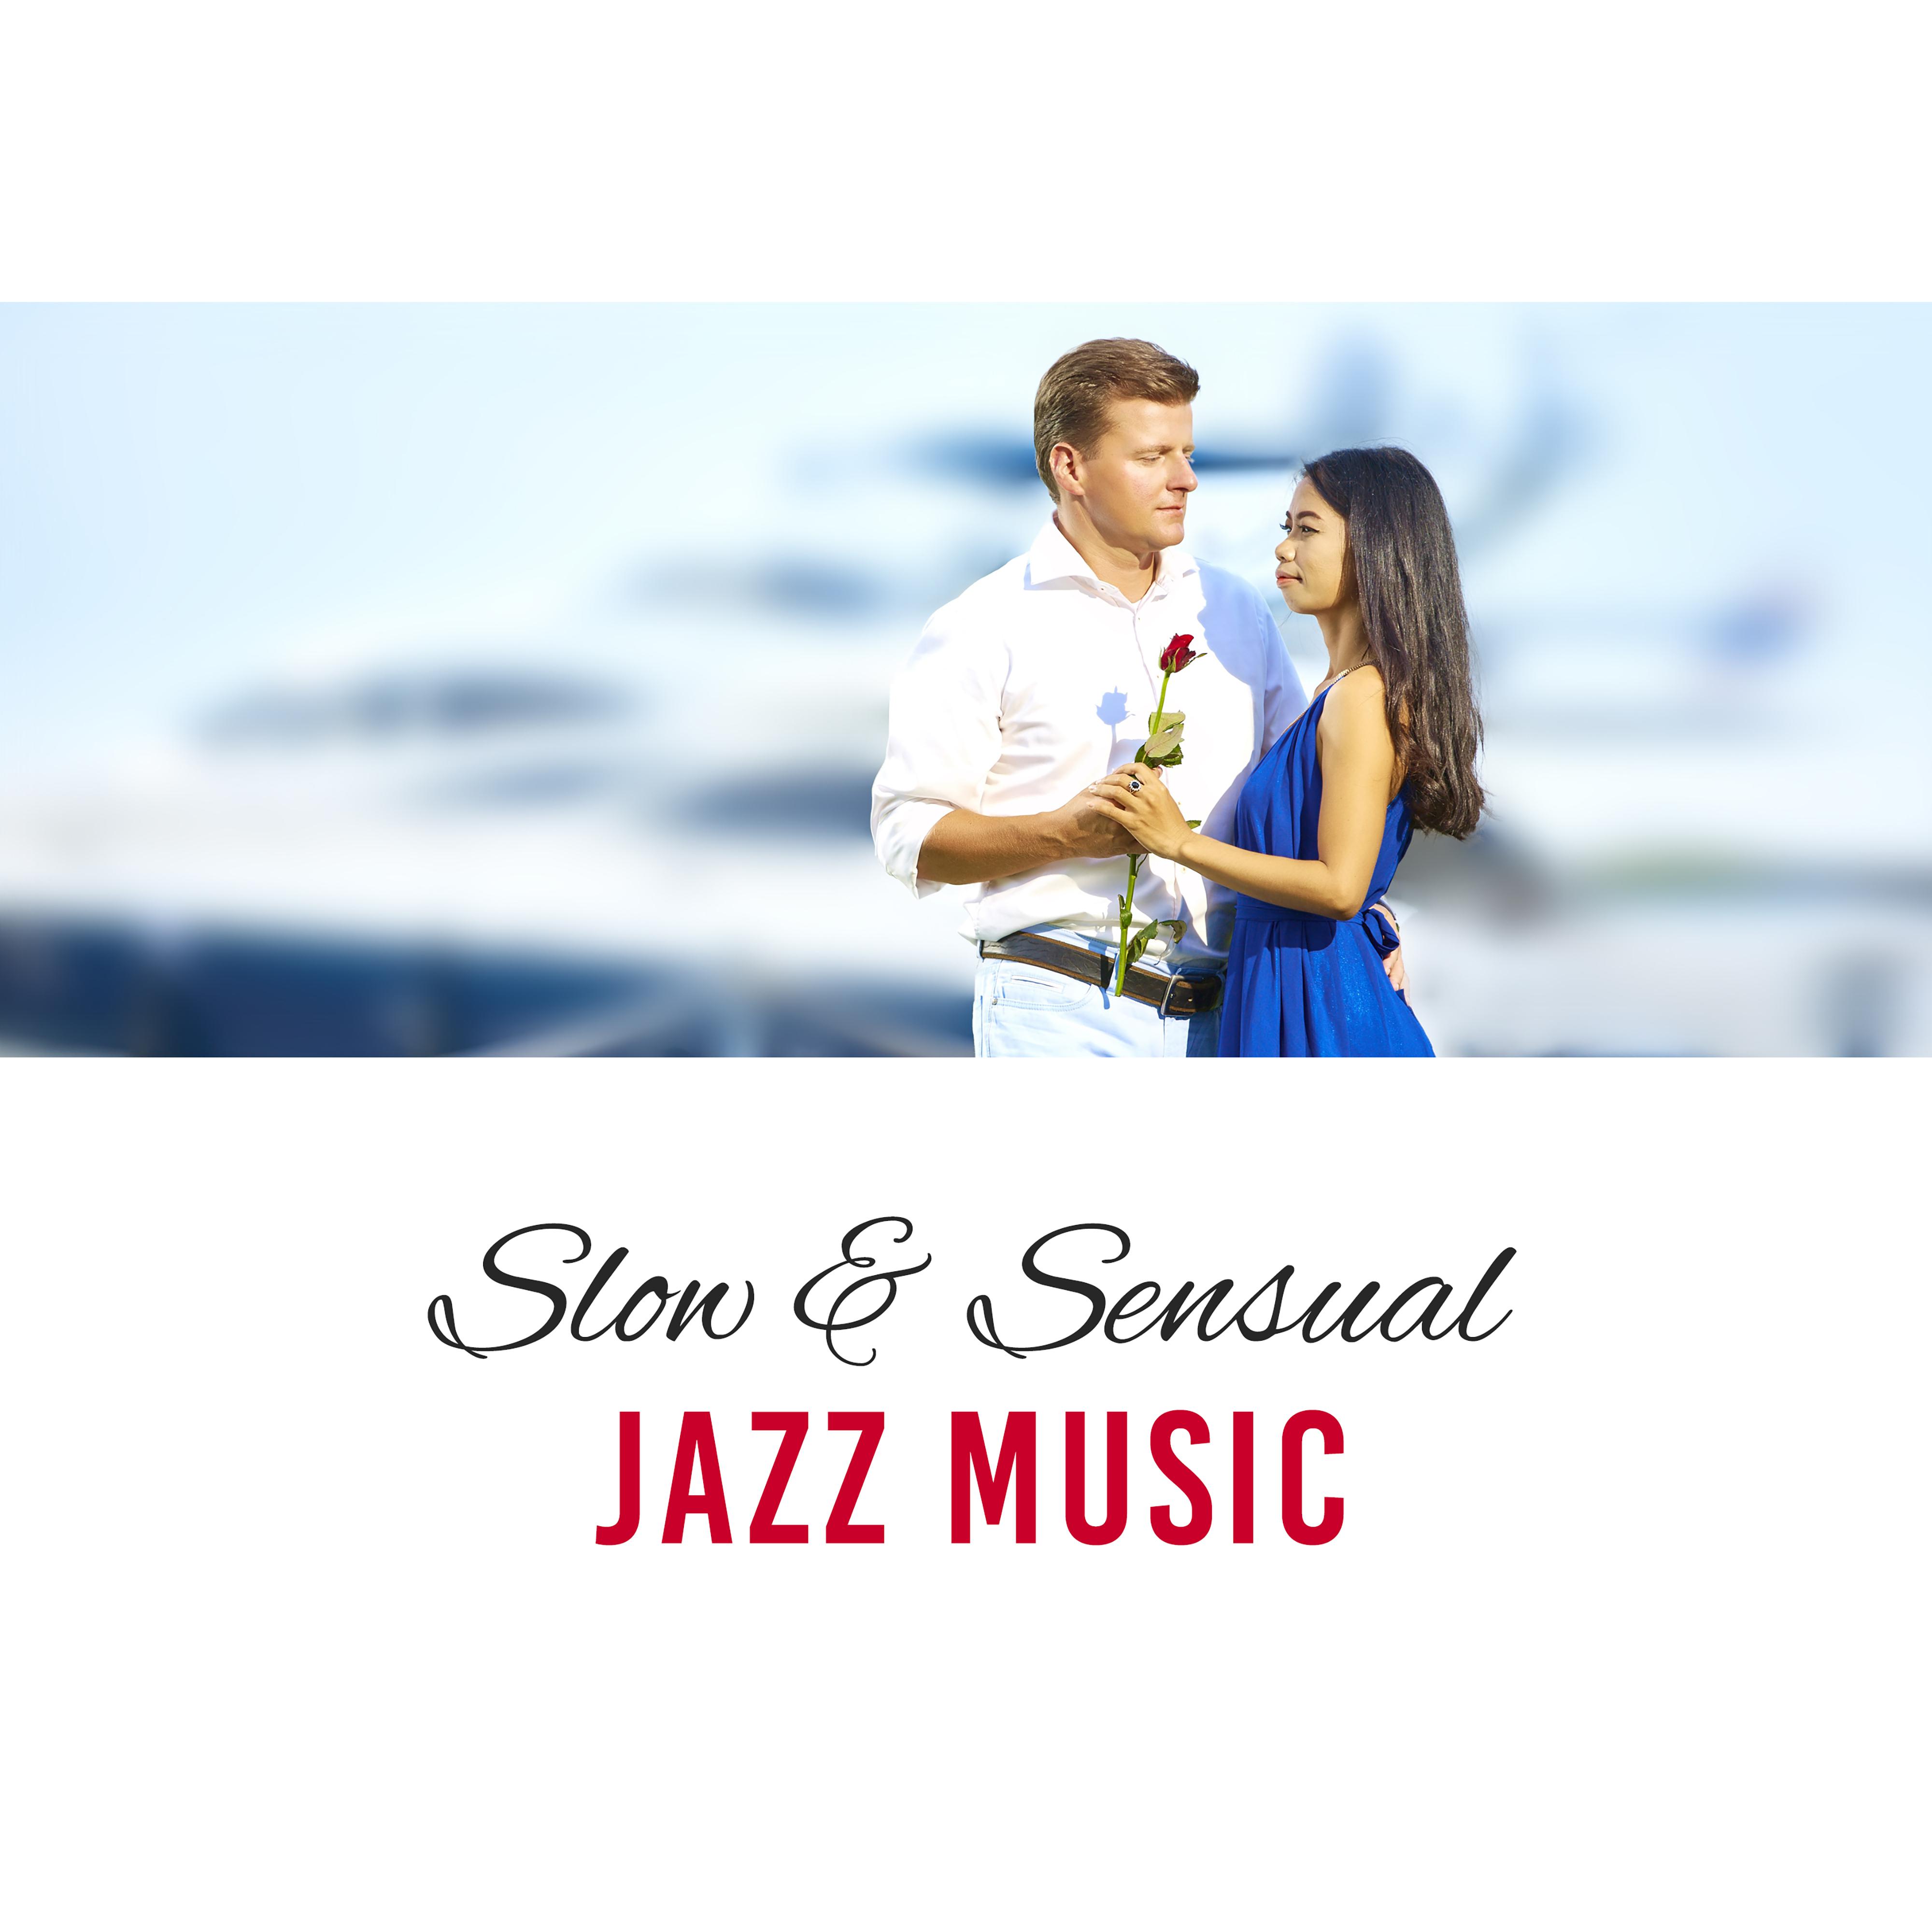 Slow & Sensual Jazz Music – Romantic Piano Melodies, Sounds for Lovers, Jazz Music, Smooth Relaxation, Erotic Night